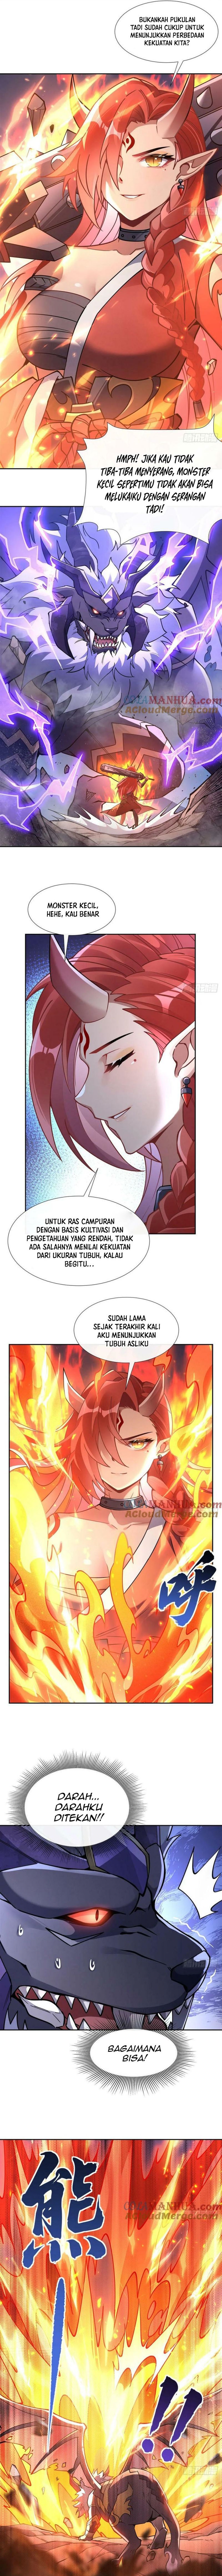 Dilarang COPAS - situs resmi www.mangacanblog.com - Komik my female apprentices are all big shots from the future 167 - chapter 167 168 Indonesia my female apprentices are all big shots from the future 167 - chapter 167 Terbaru 5|Baca Manga Komik Indonesia|Mangacan